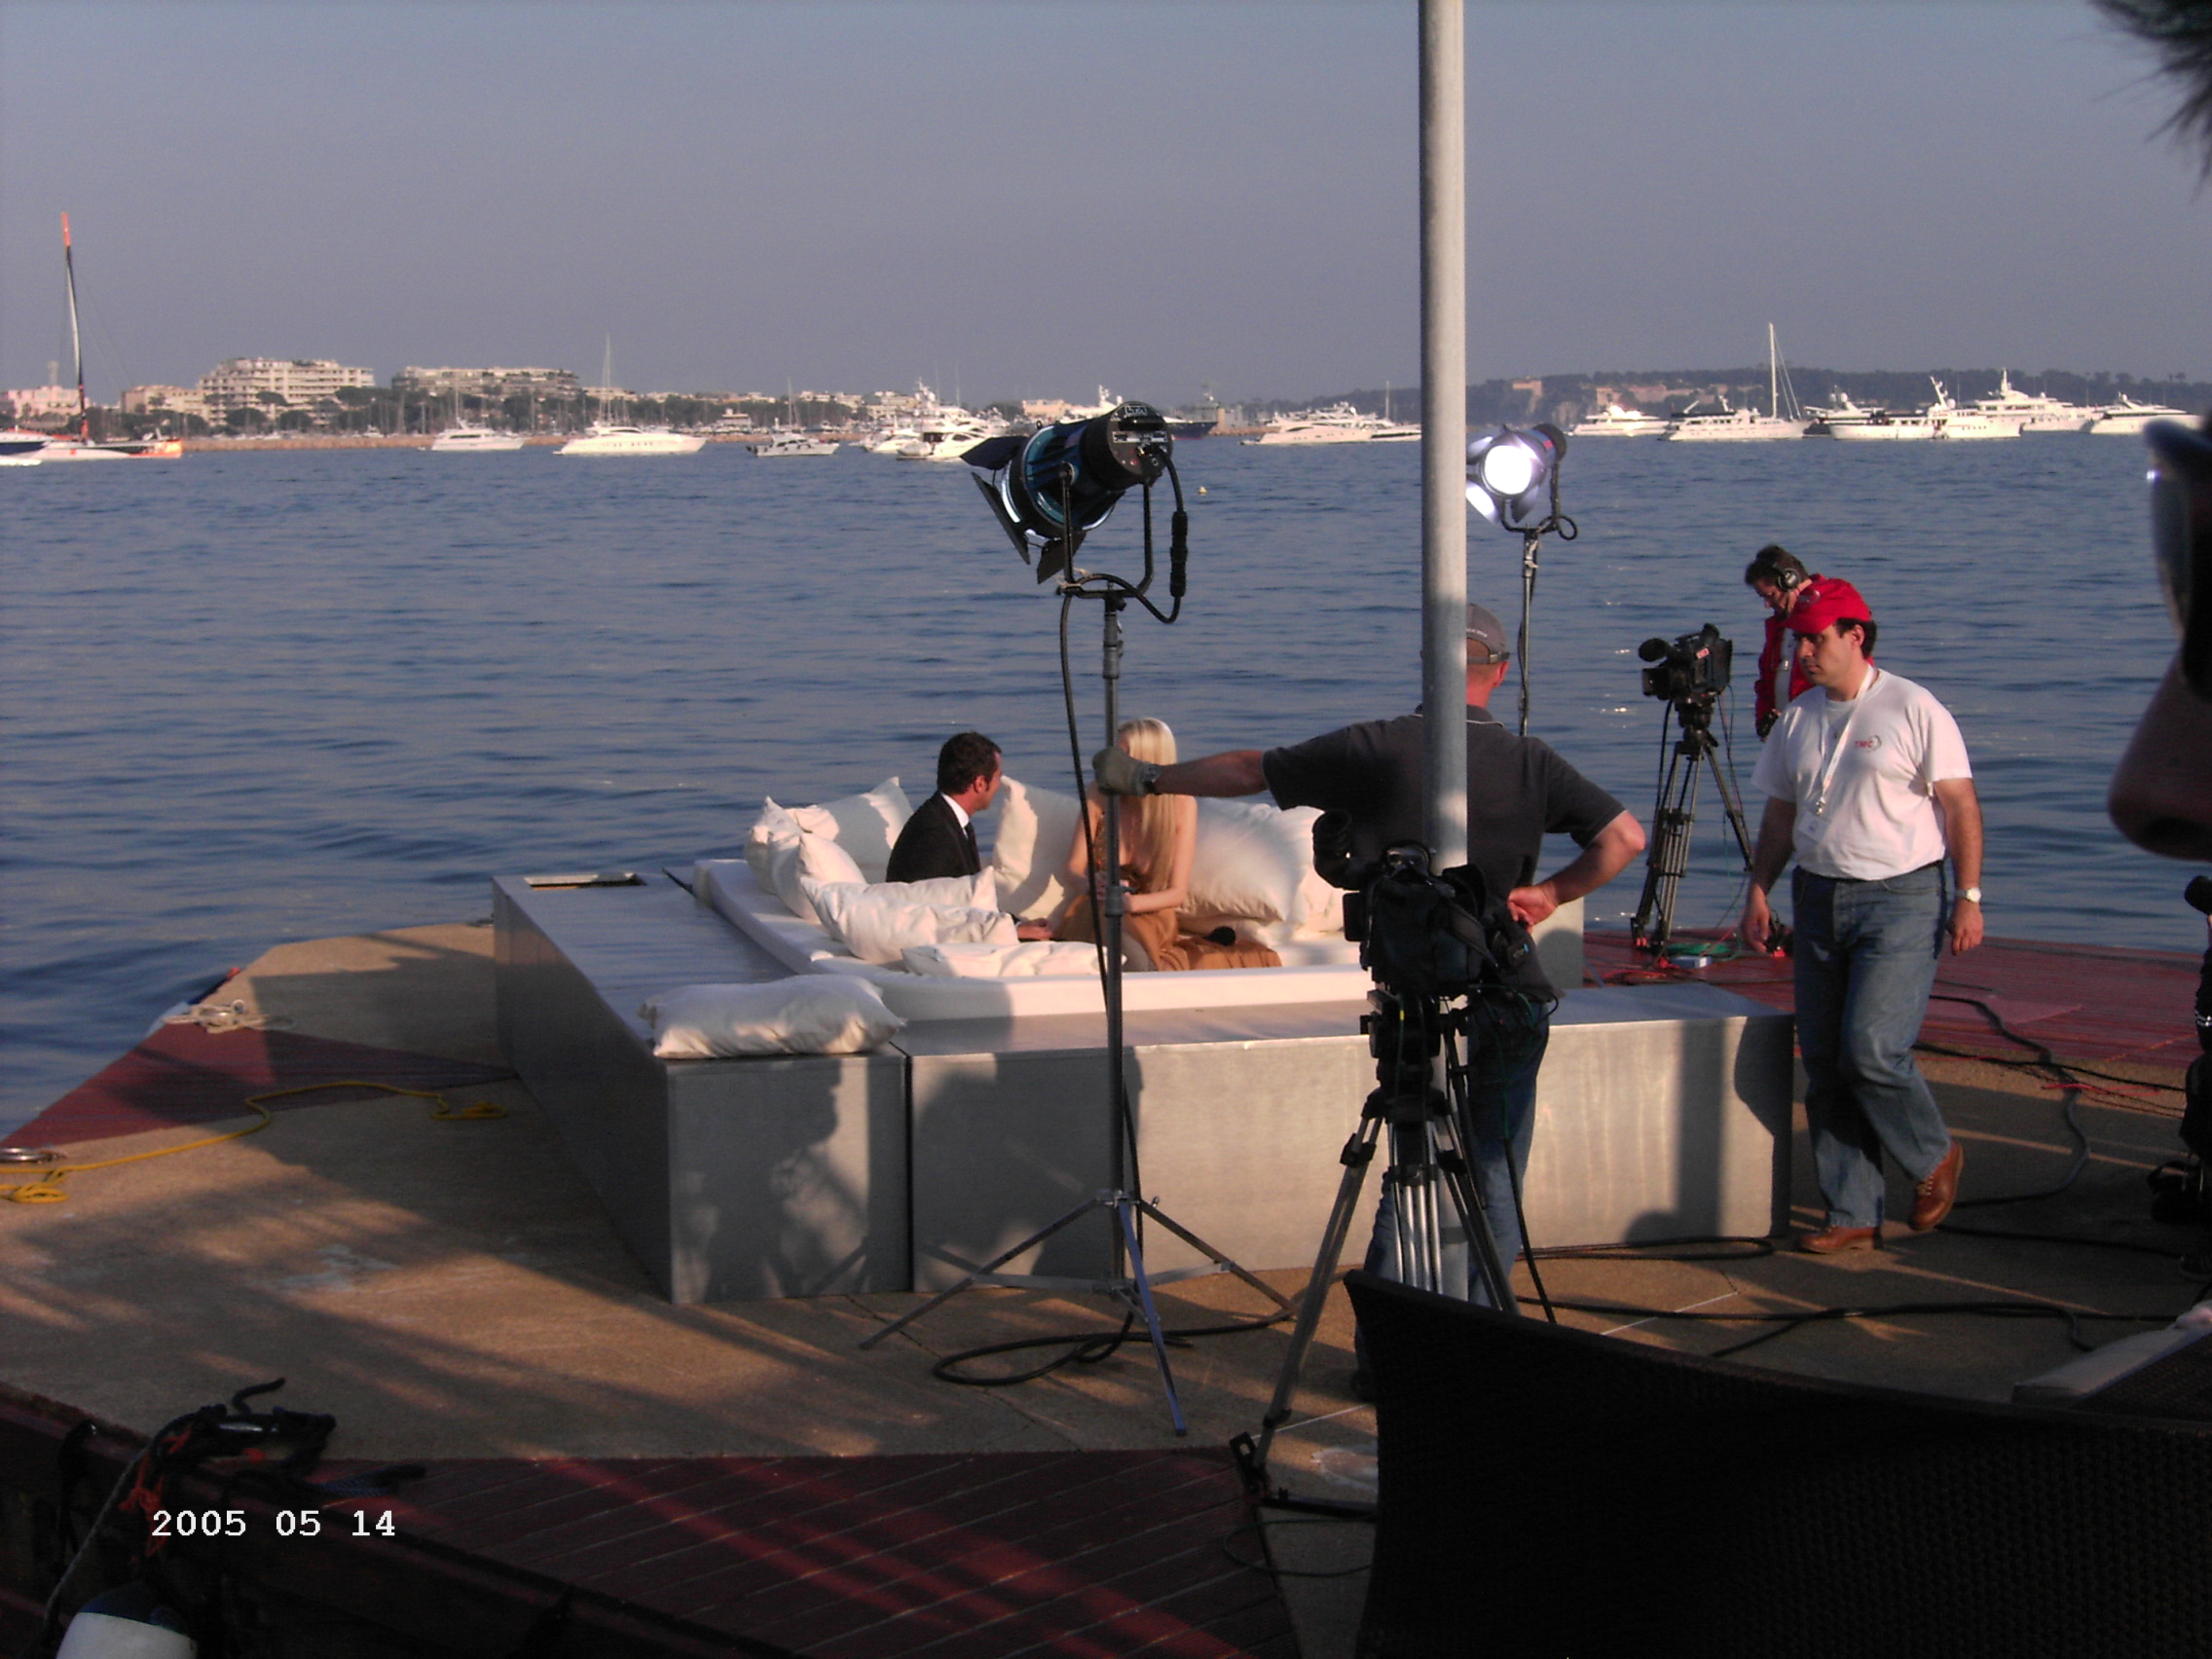 TV interview close to the Croisette in Cannes, France